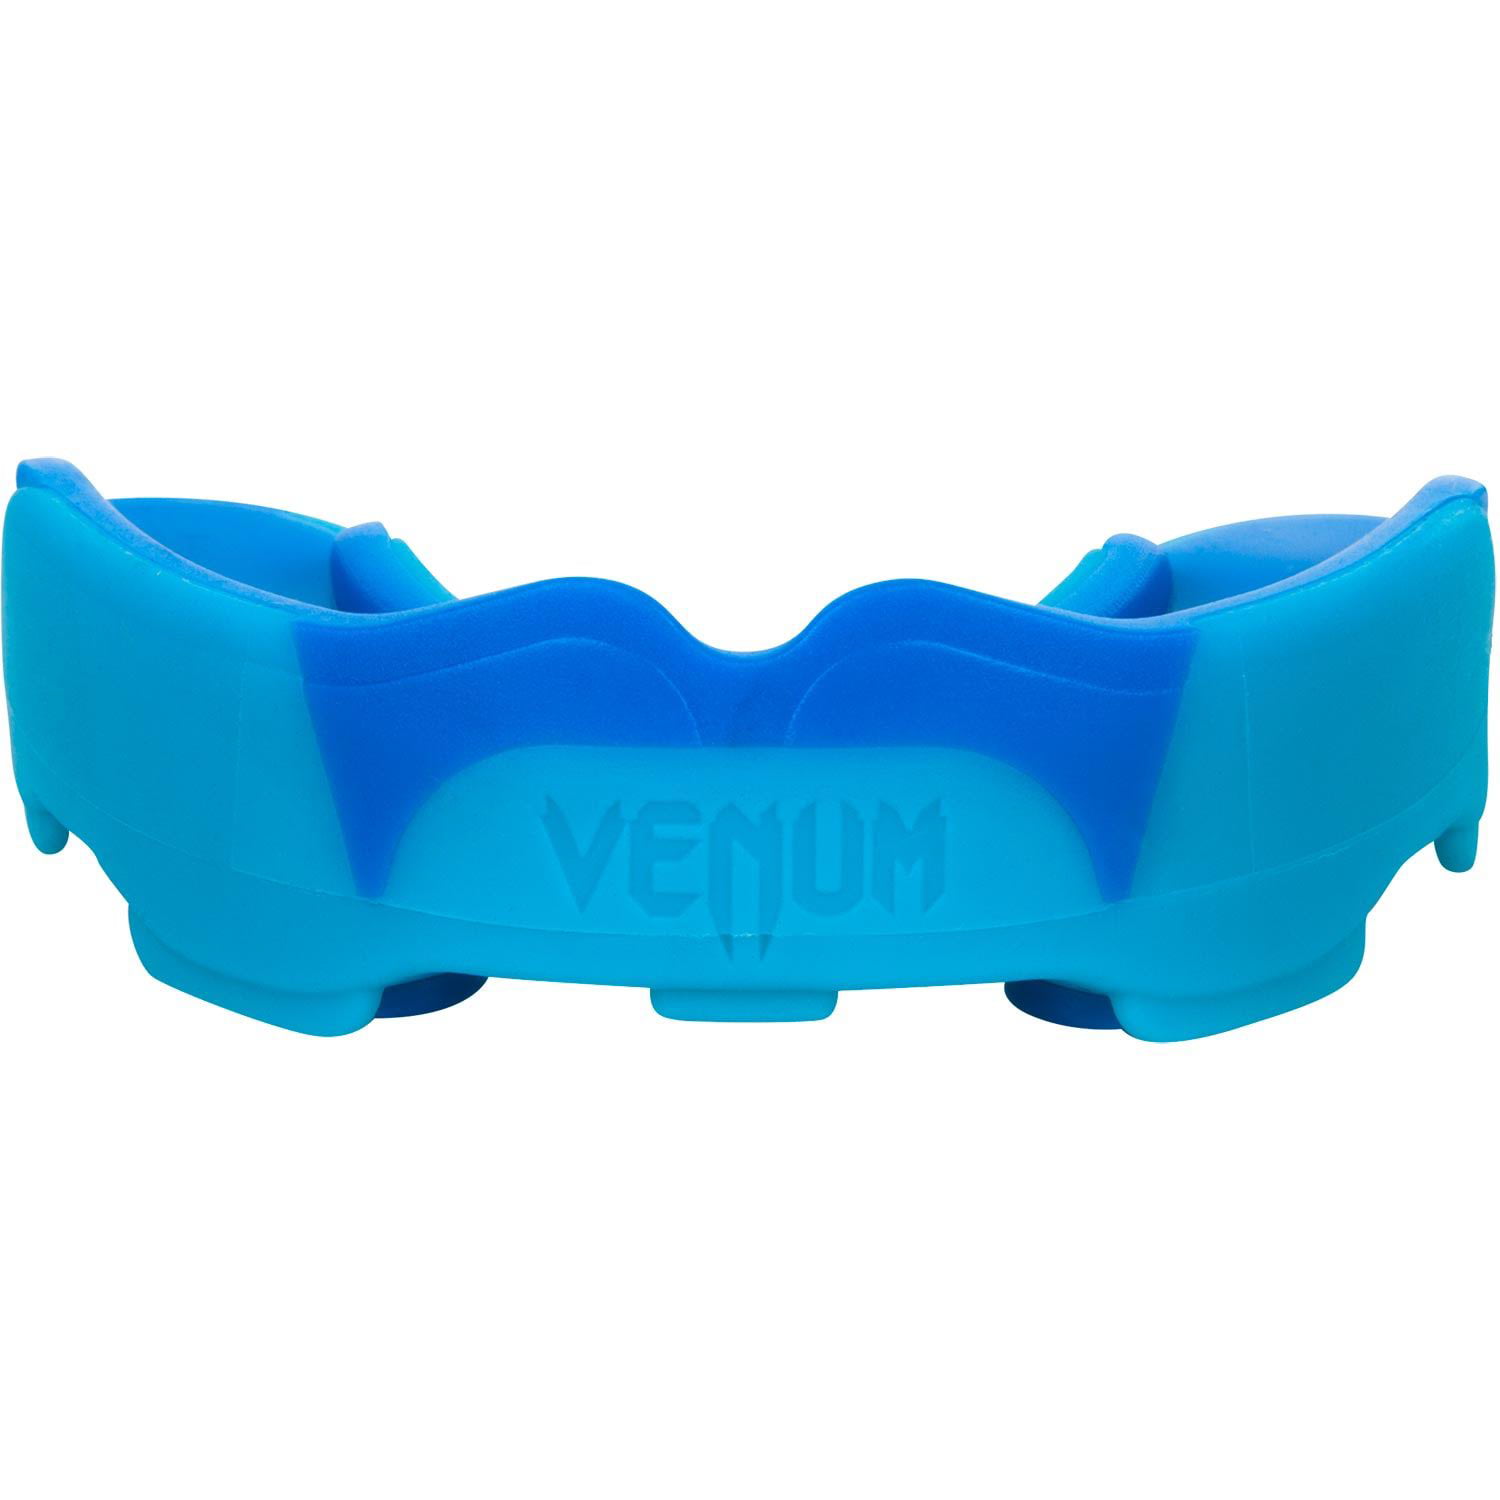 Venum Predator Mouth guard with Case Boxing Martial MMA BJJ Sparring Mouthguard 